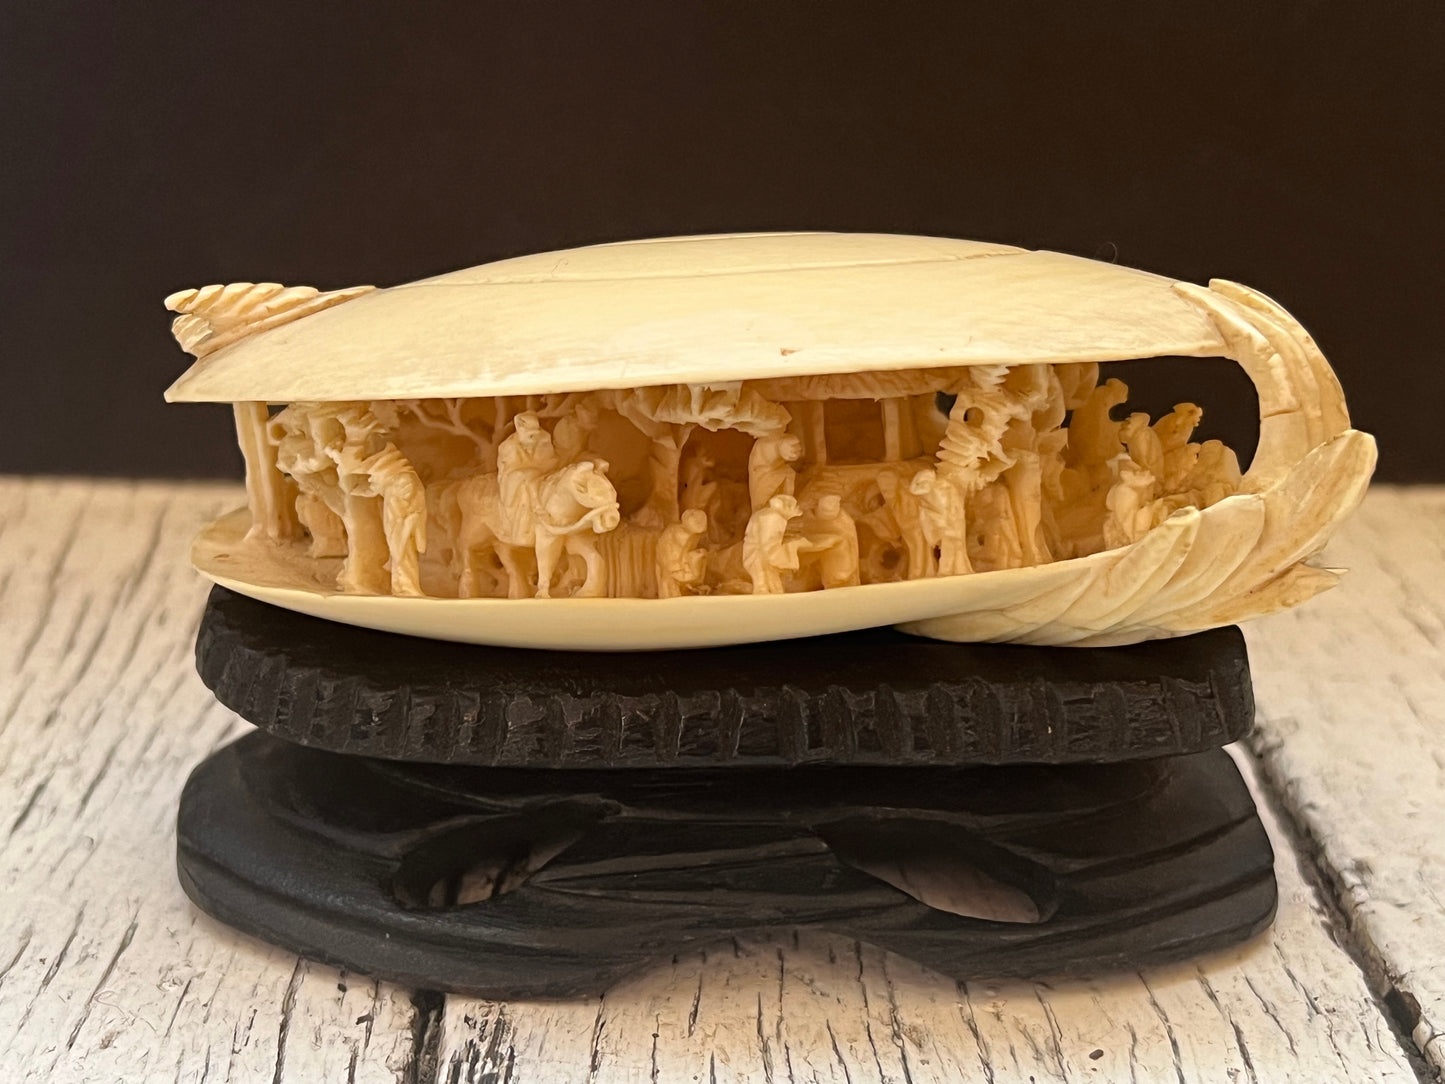 Rare and lovely early Chinese 20th century “clam’s dream” carving in the anabori style, circa 1920s